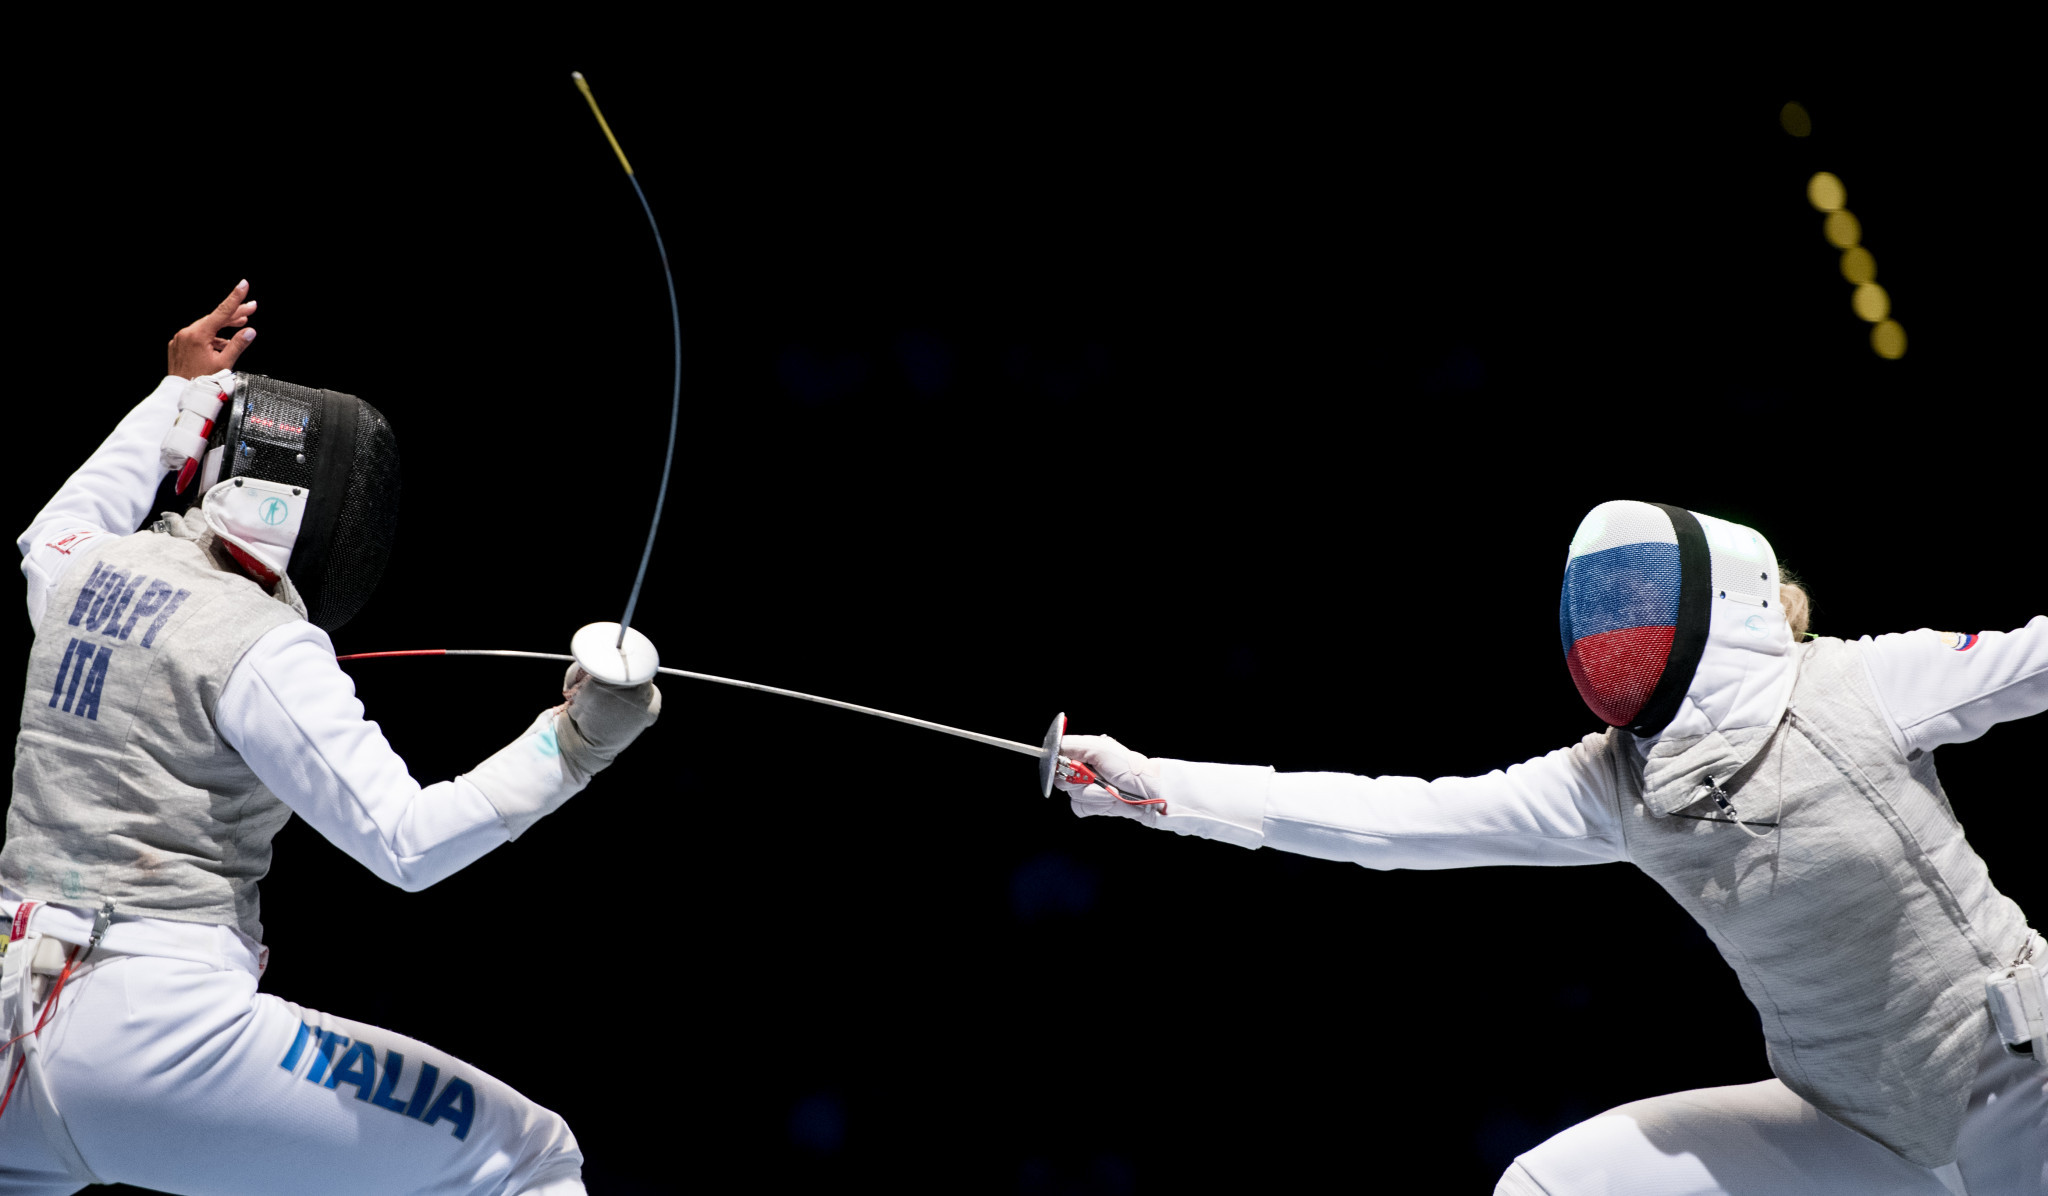 Inna Deriglazova, right, won the women's Foil World Cup event in Germany ©Getty Images